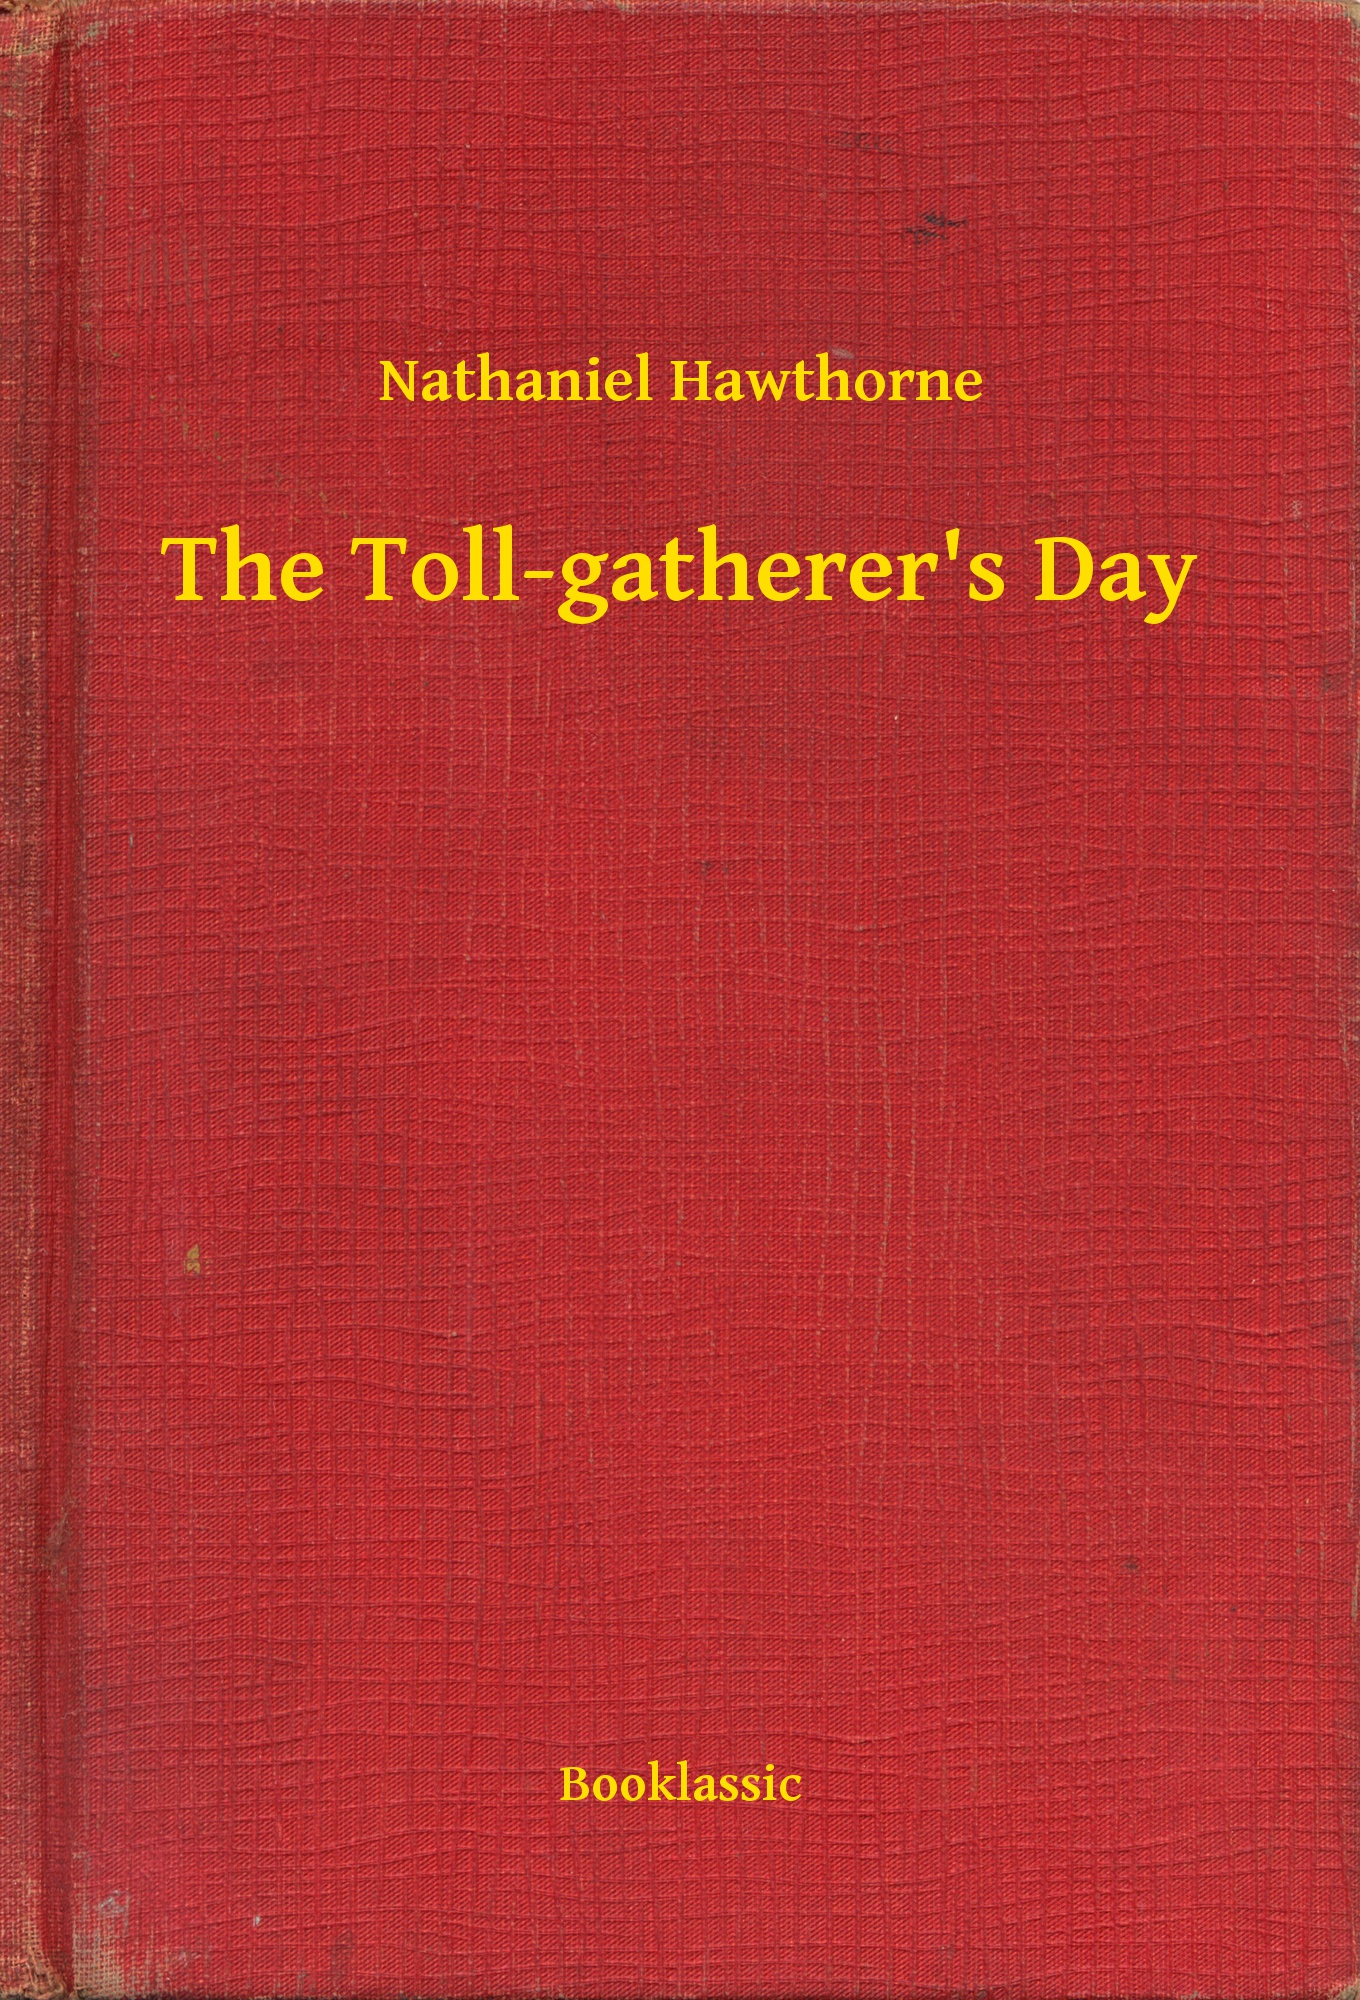 The Toll-gatherer"s Day